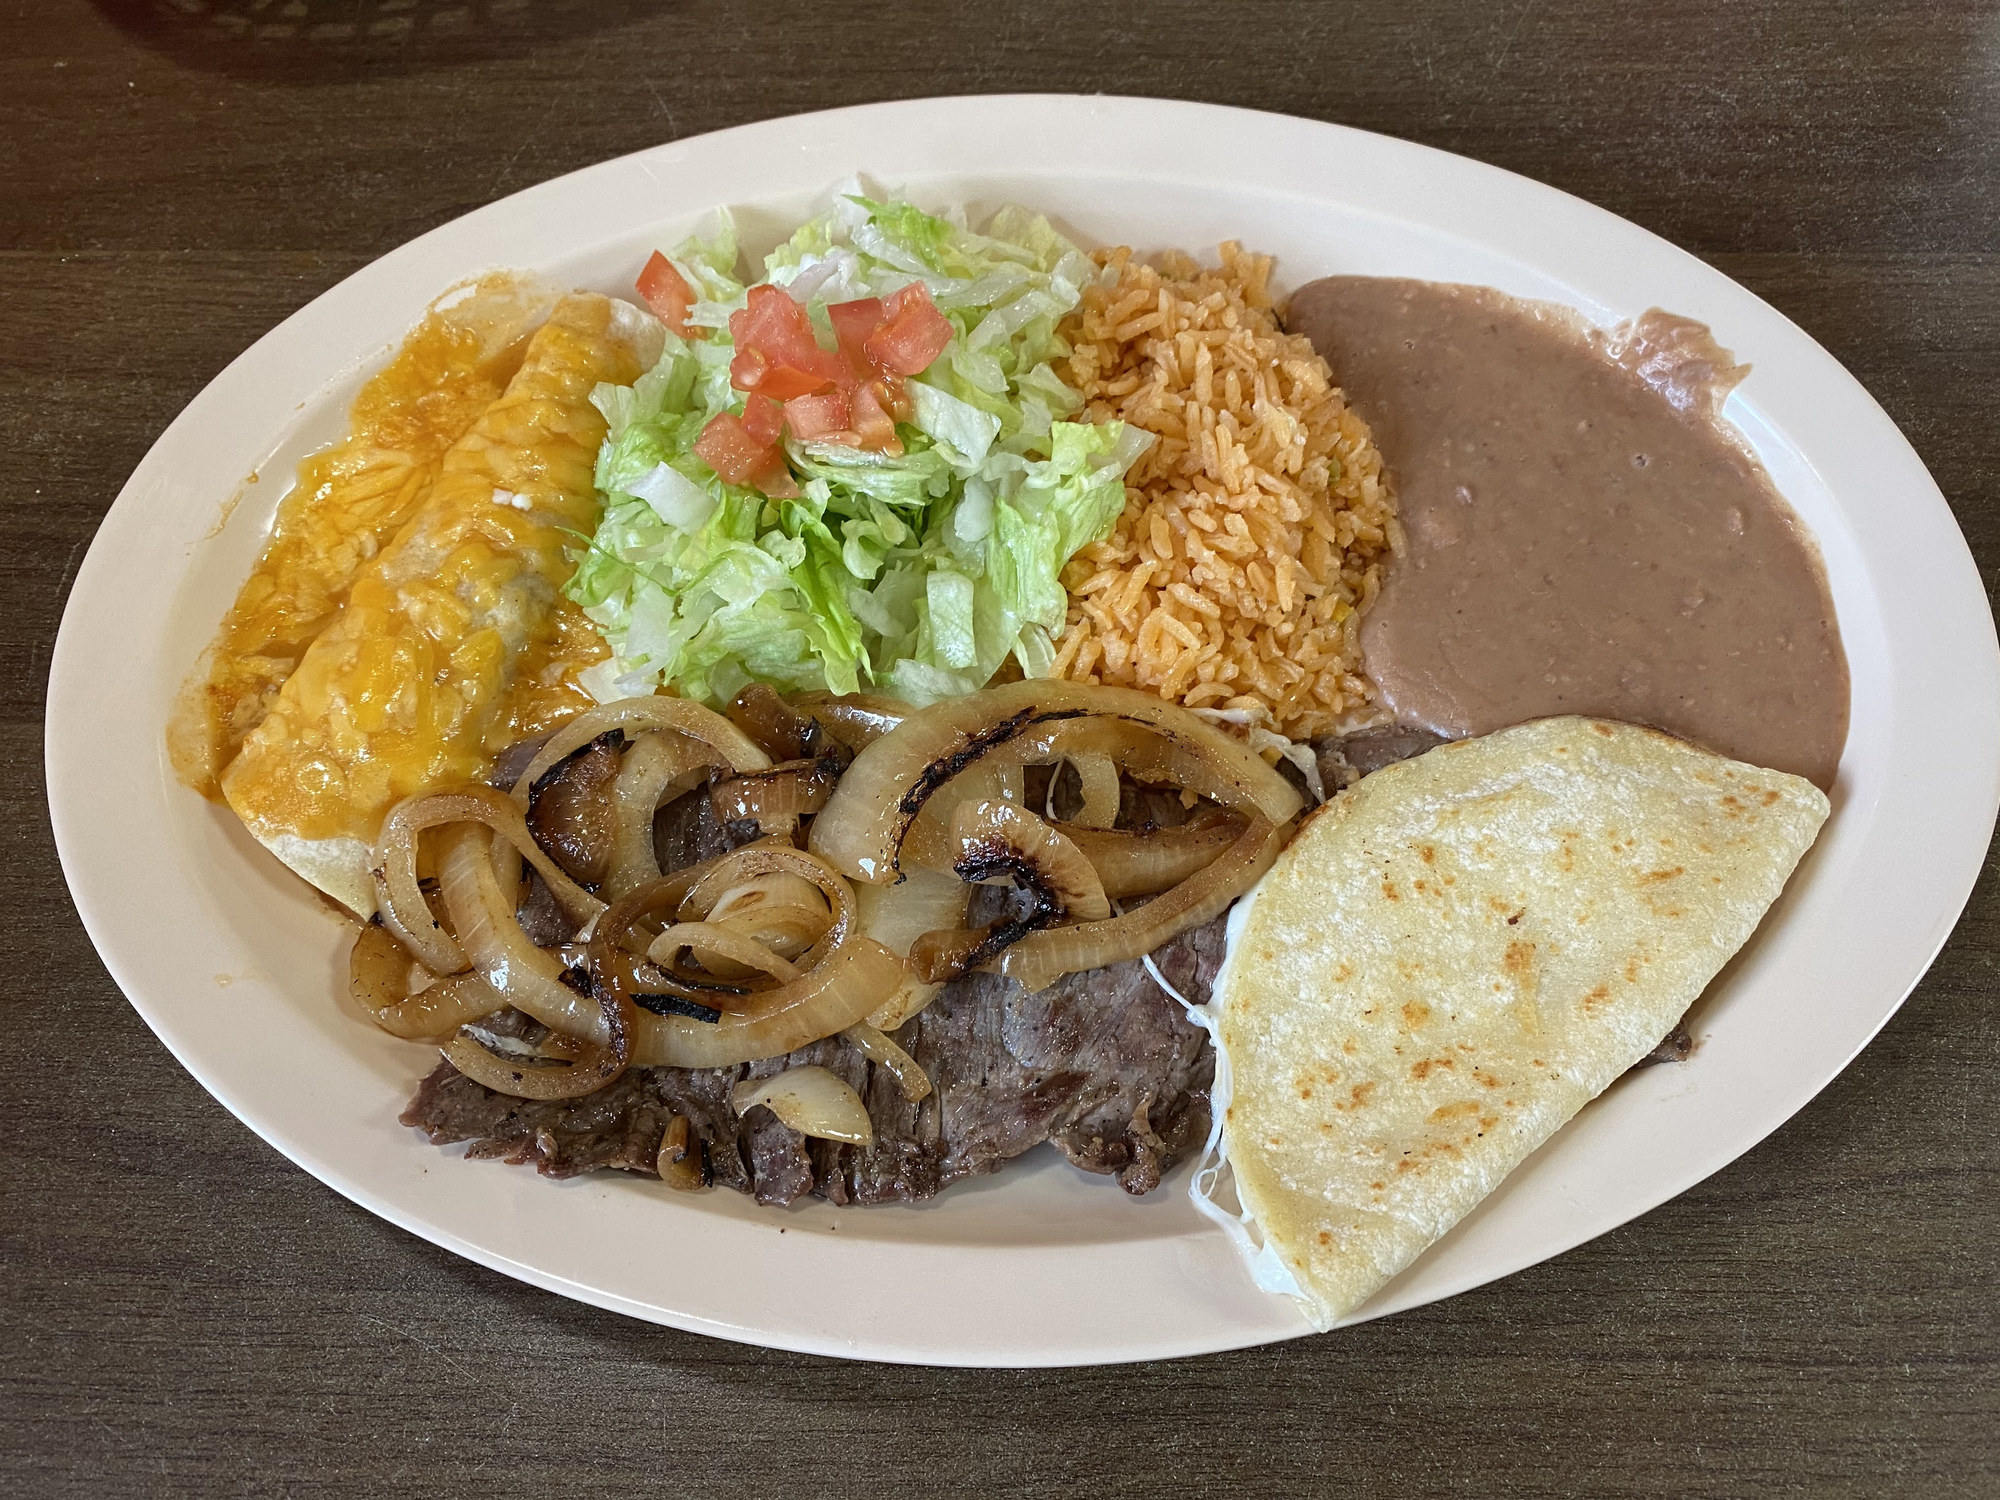 plate of rice, refried beans, an enchilada, steak and onions, and quesadila